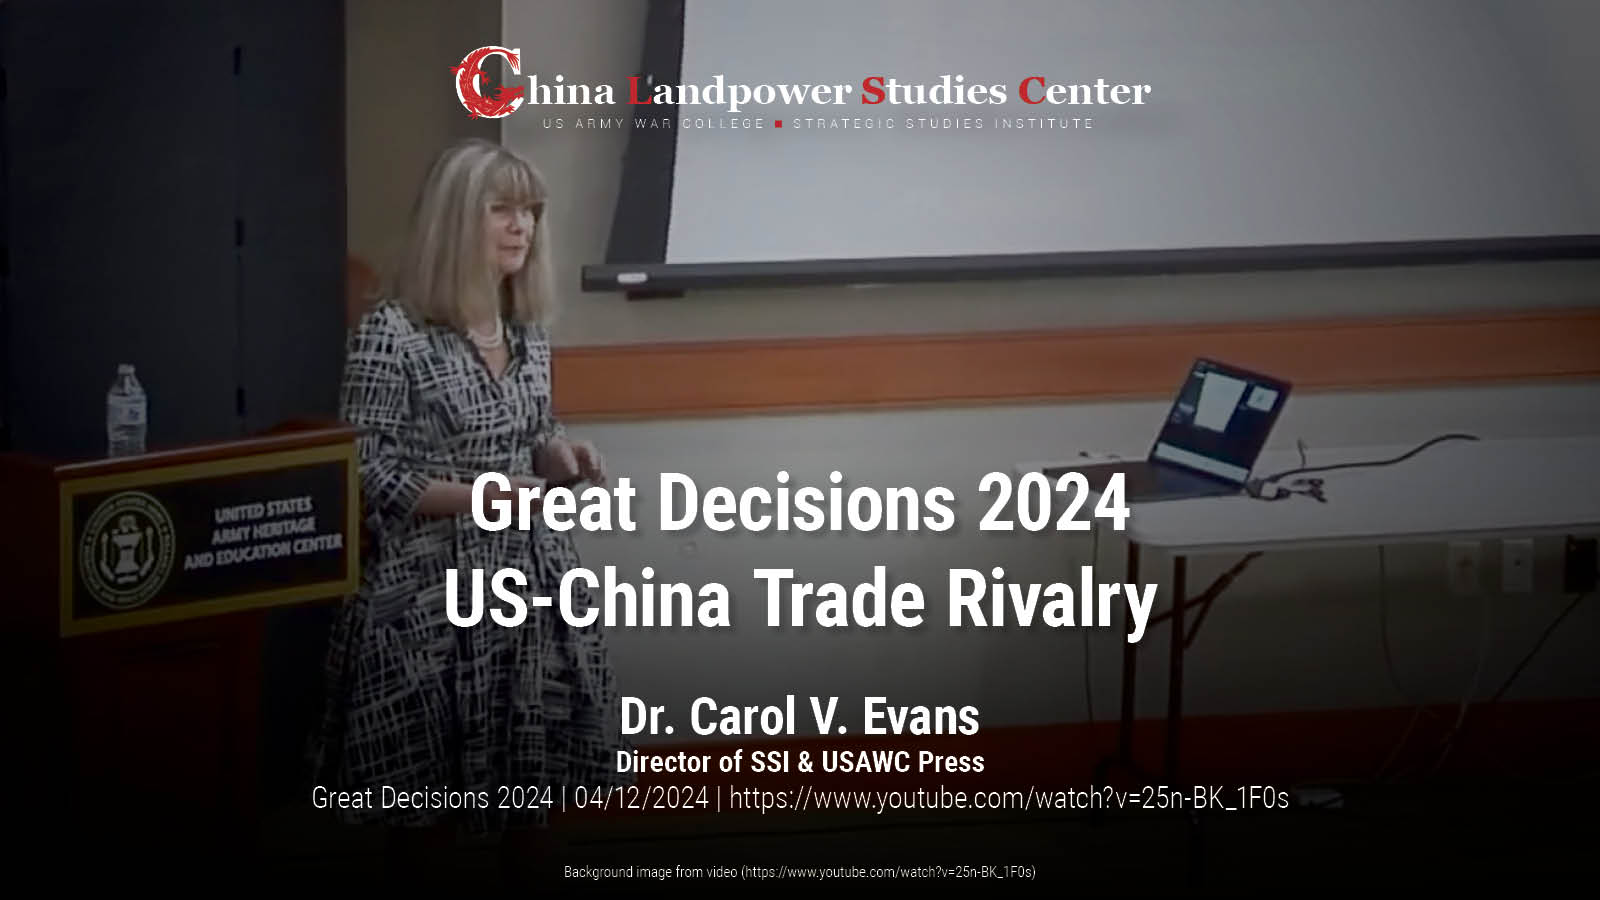 Great Decisions 2024: US-China Trade Rivalry | Dr. Carol V. Evans